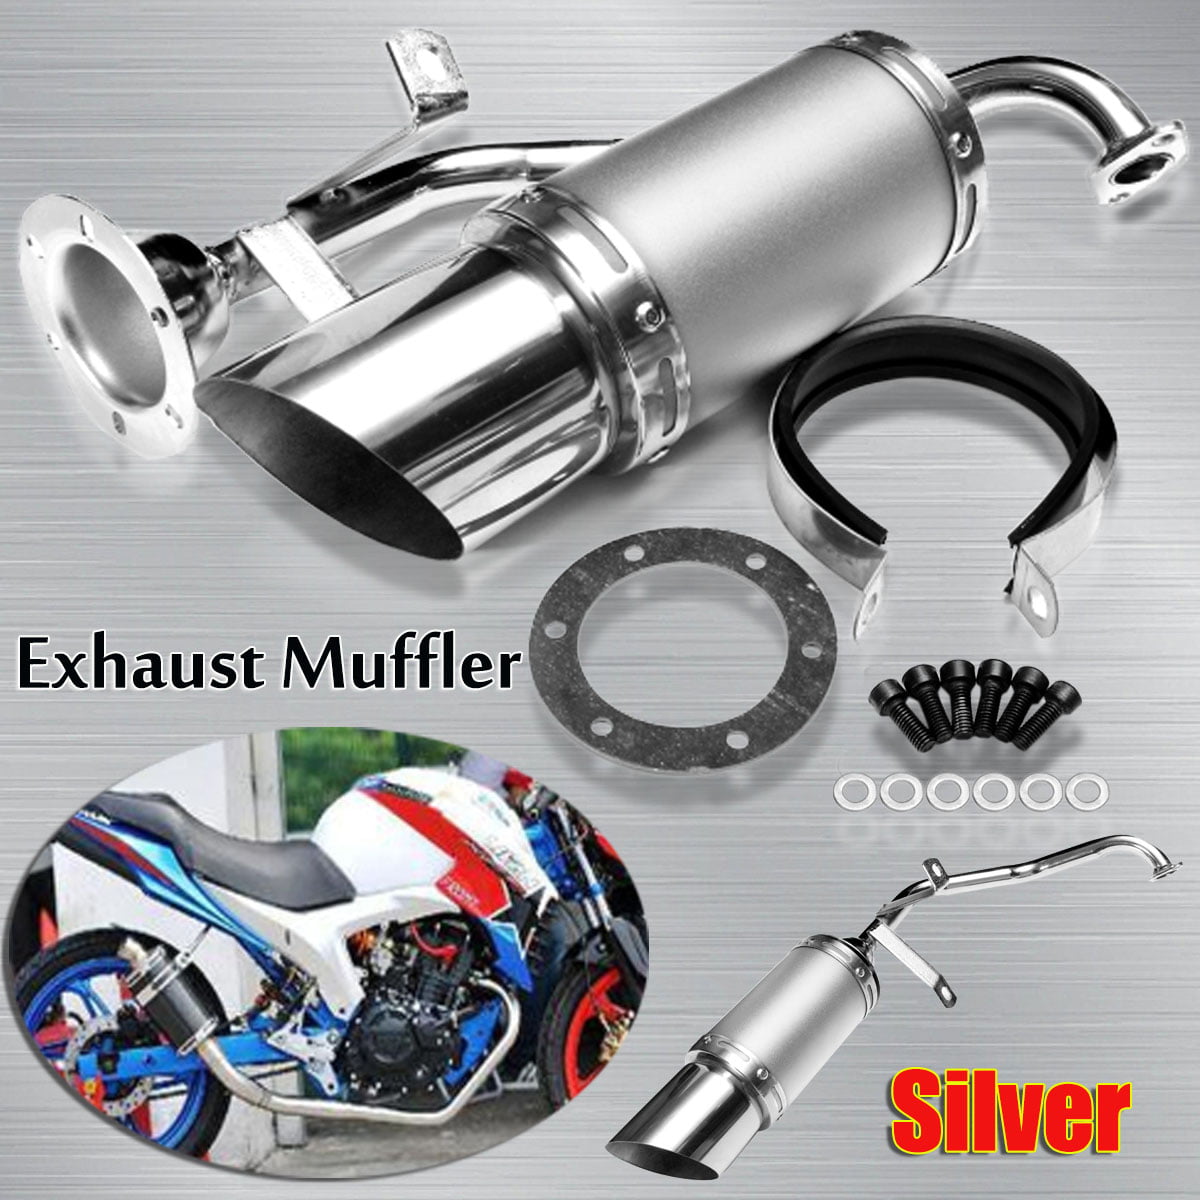 Sliver Exhaust System Muffle Gaskets System For GY6 150cc Scooter ATV Go Kart 